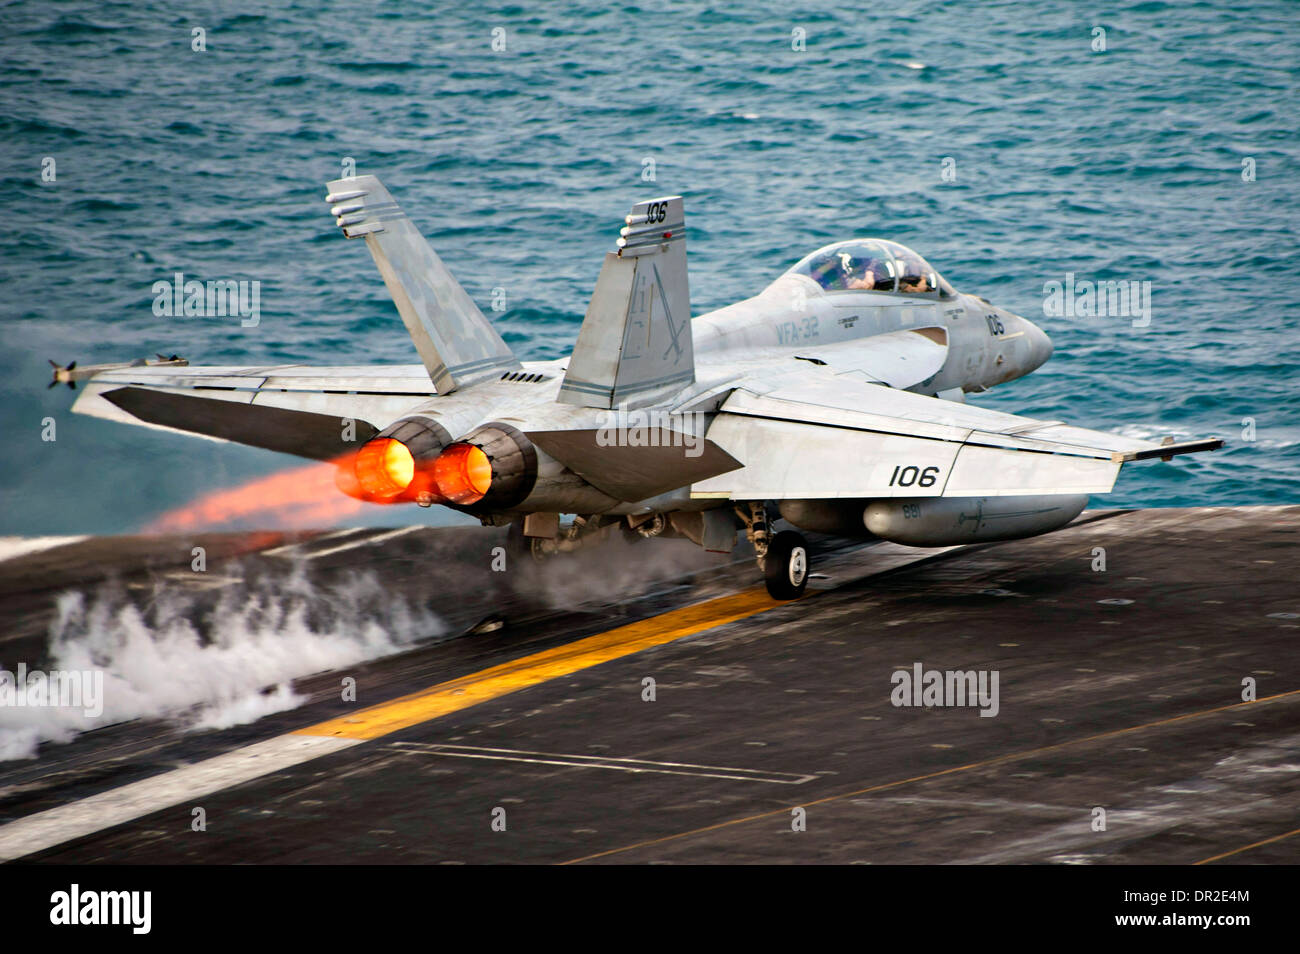 A US Navy F/A-18F Super Hornet fighter aircraft launches from the flight deck of the US Navy aircraft carrier USS Harry S. Truman January 15, 2014 in the Arabian Sea. Stock Photo